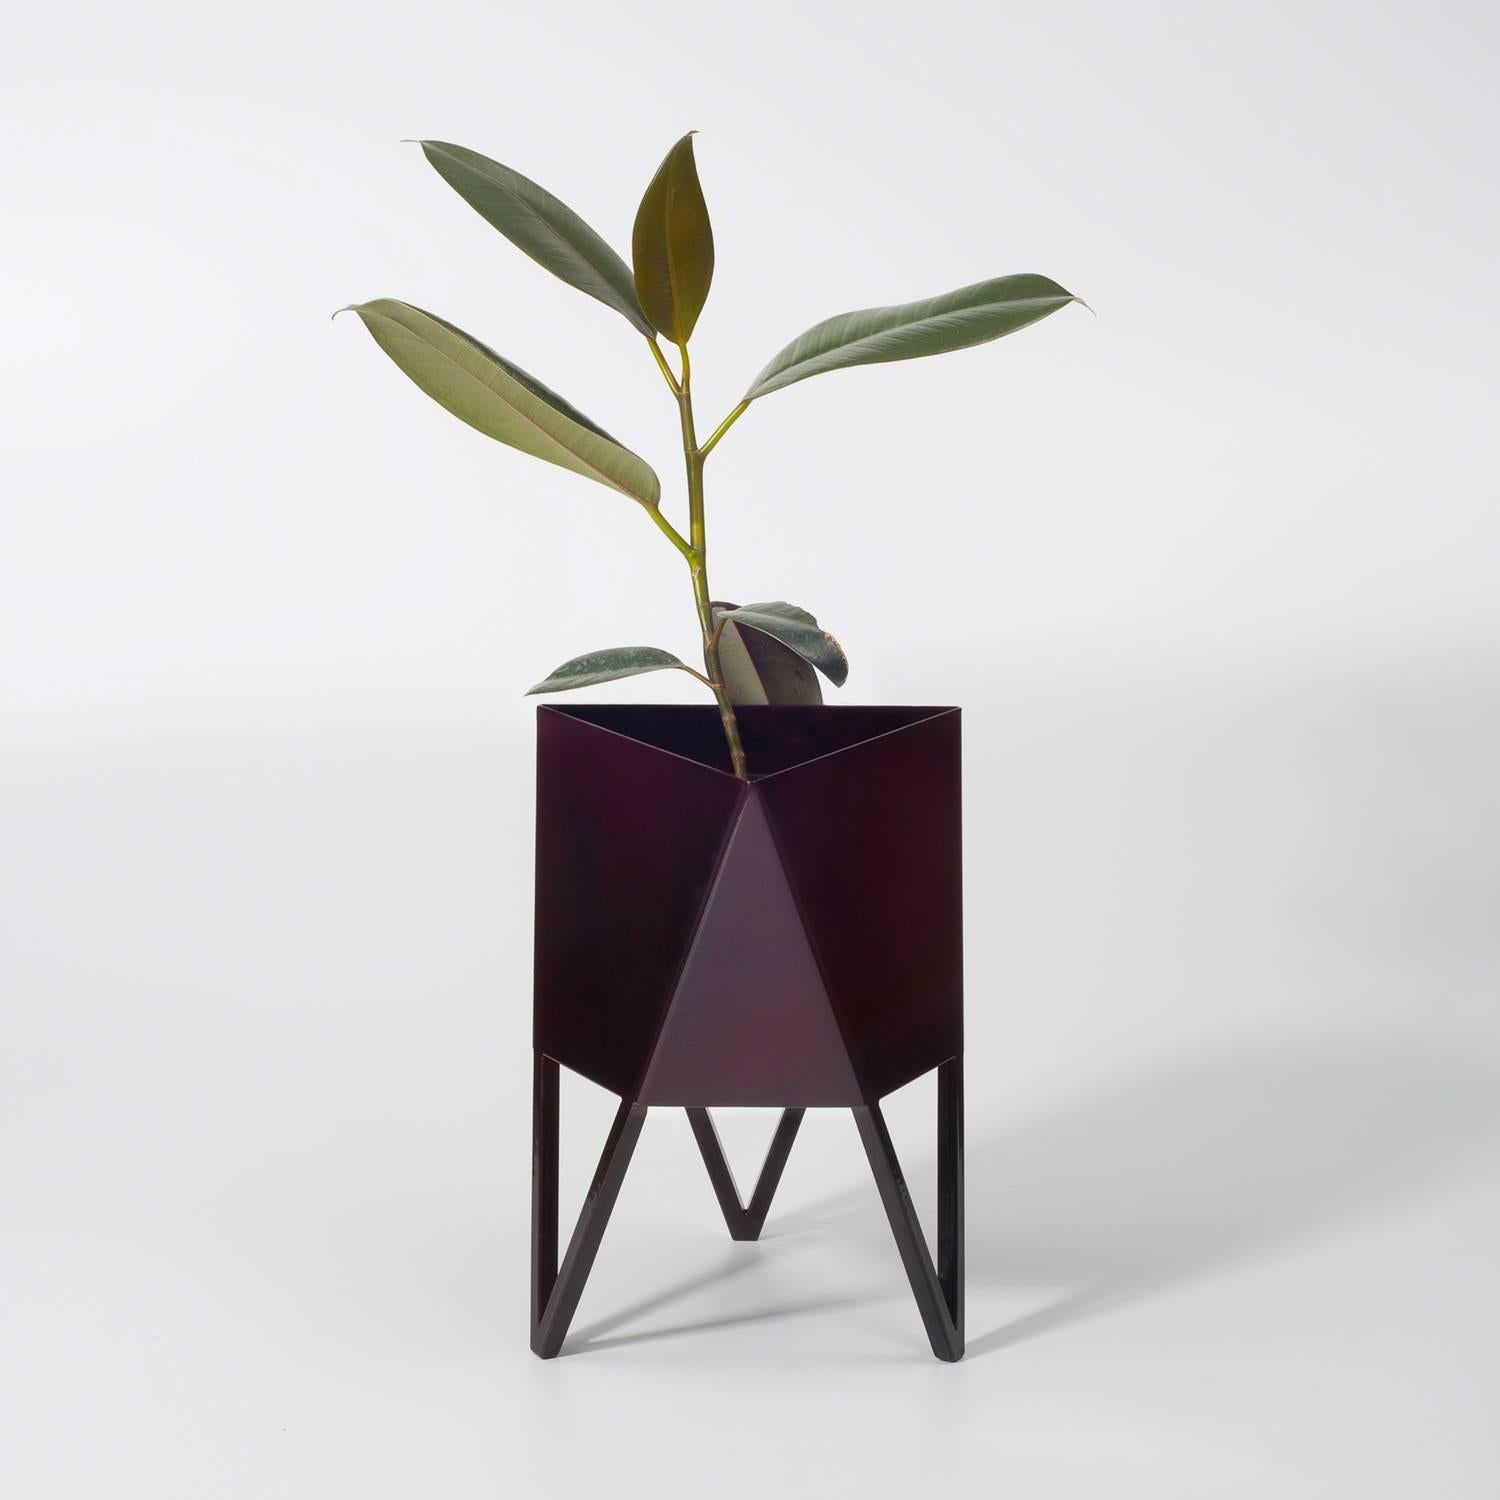 Contemporary Deca Planter in Flat Black Steel, Medium, by Force/Collide